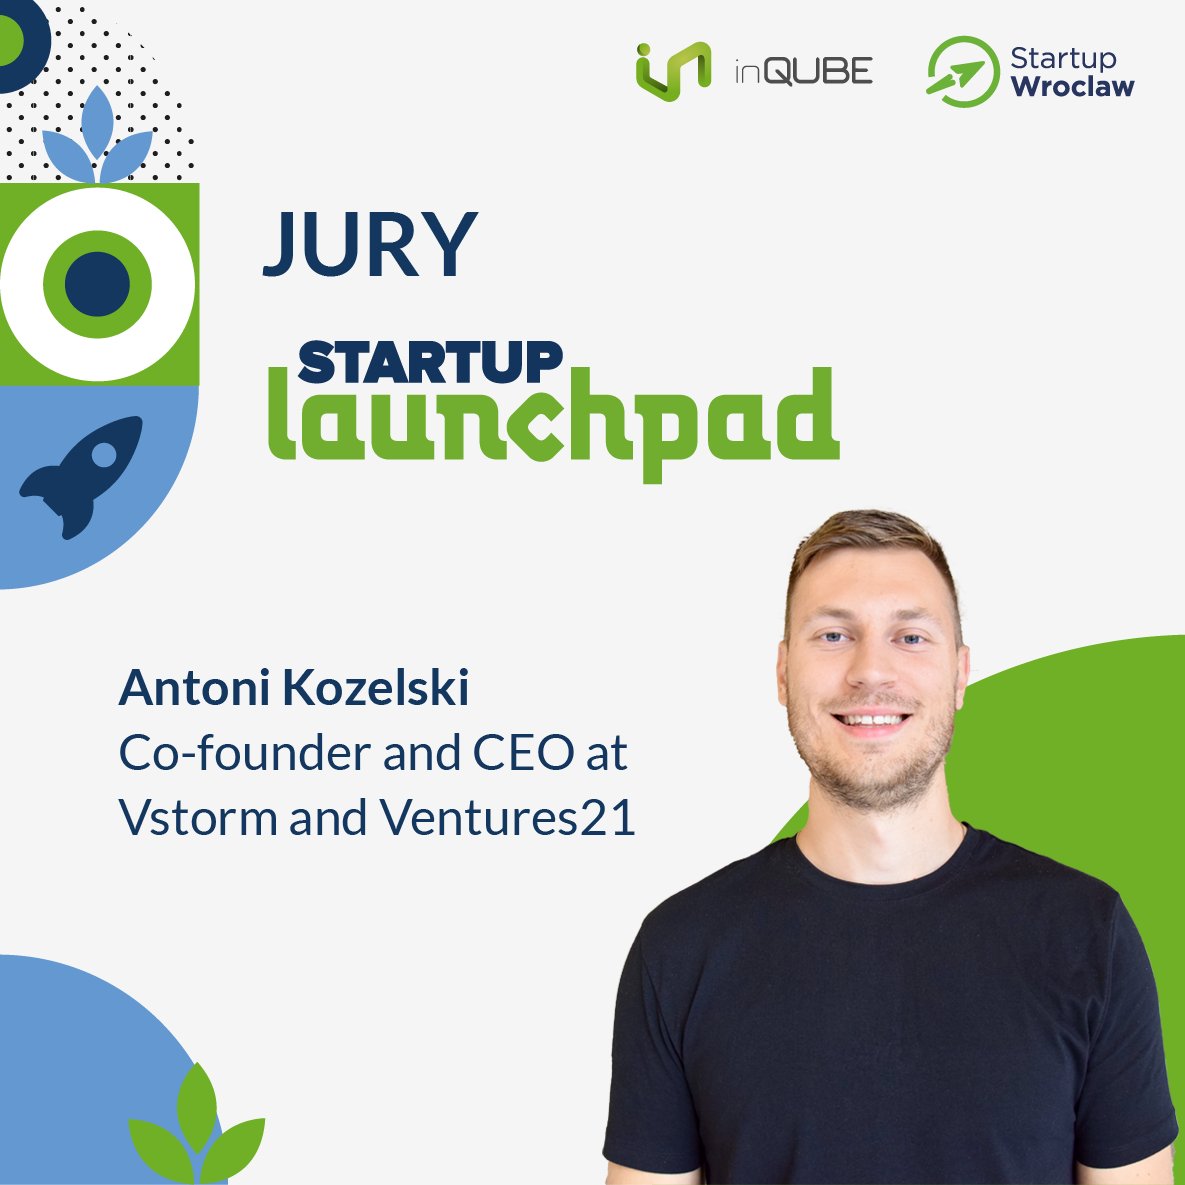 I am going to participate as a jury at @InvestInWroclaw to qualify the top 6 startups from 20 participants to attend further in the #mentoring program.

Looking forward to seeing startup #pitches

See the link below to get more details about mentoring program 👇